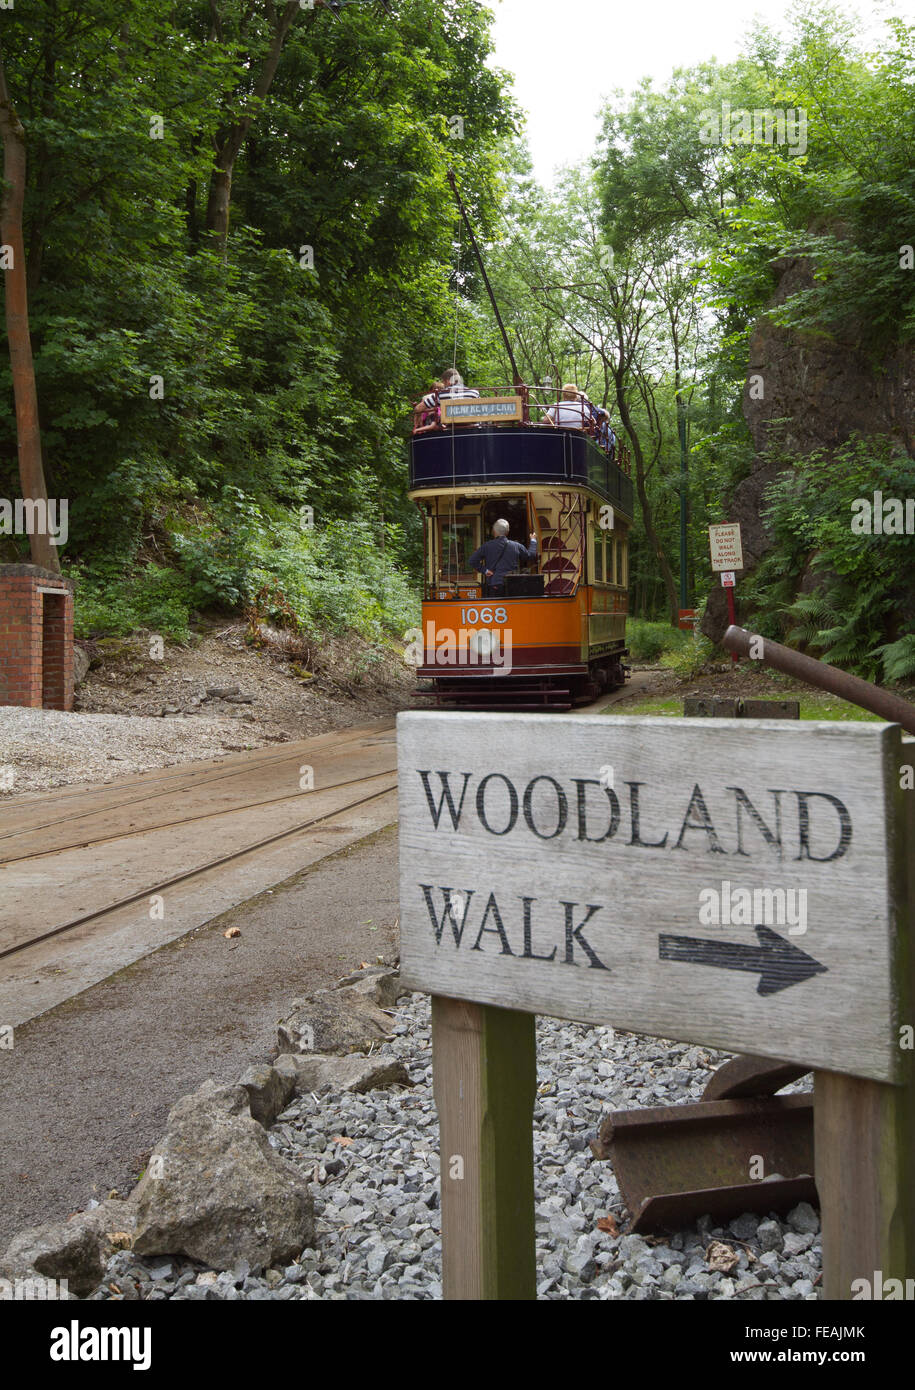 Glasgow Tram departs at Crich Tramway Museum with a sign in the foreground directing visitors to the Woodland Walk sculptures Stock Photo